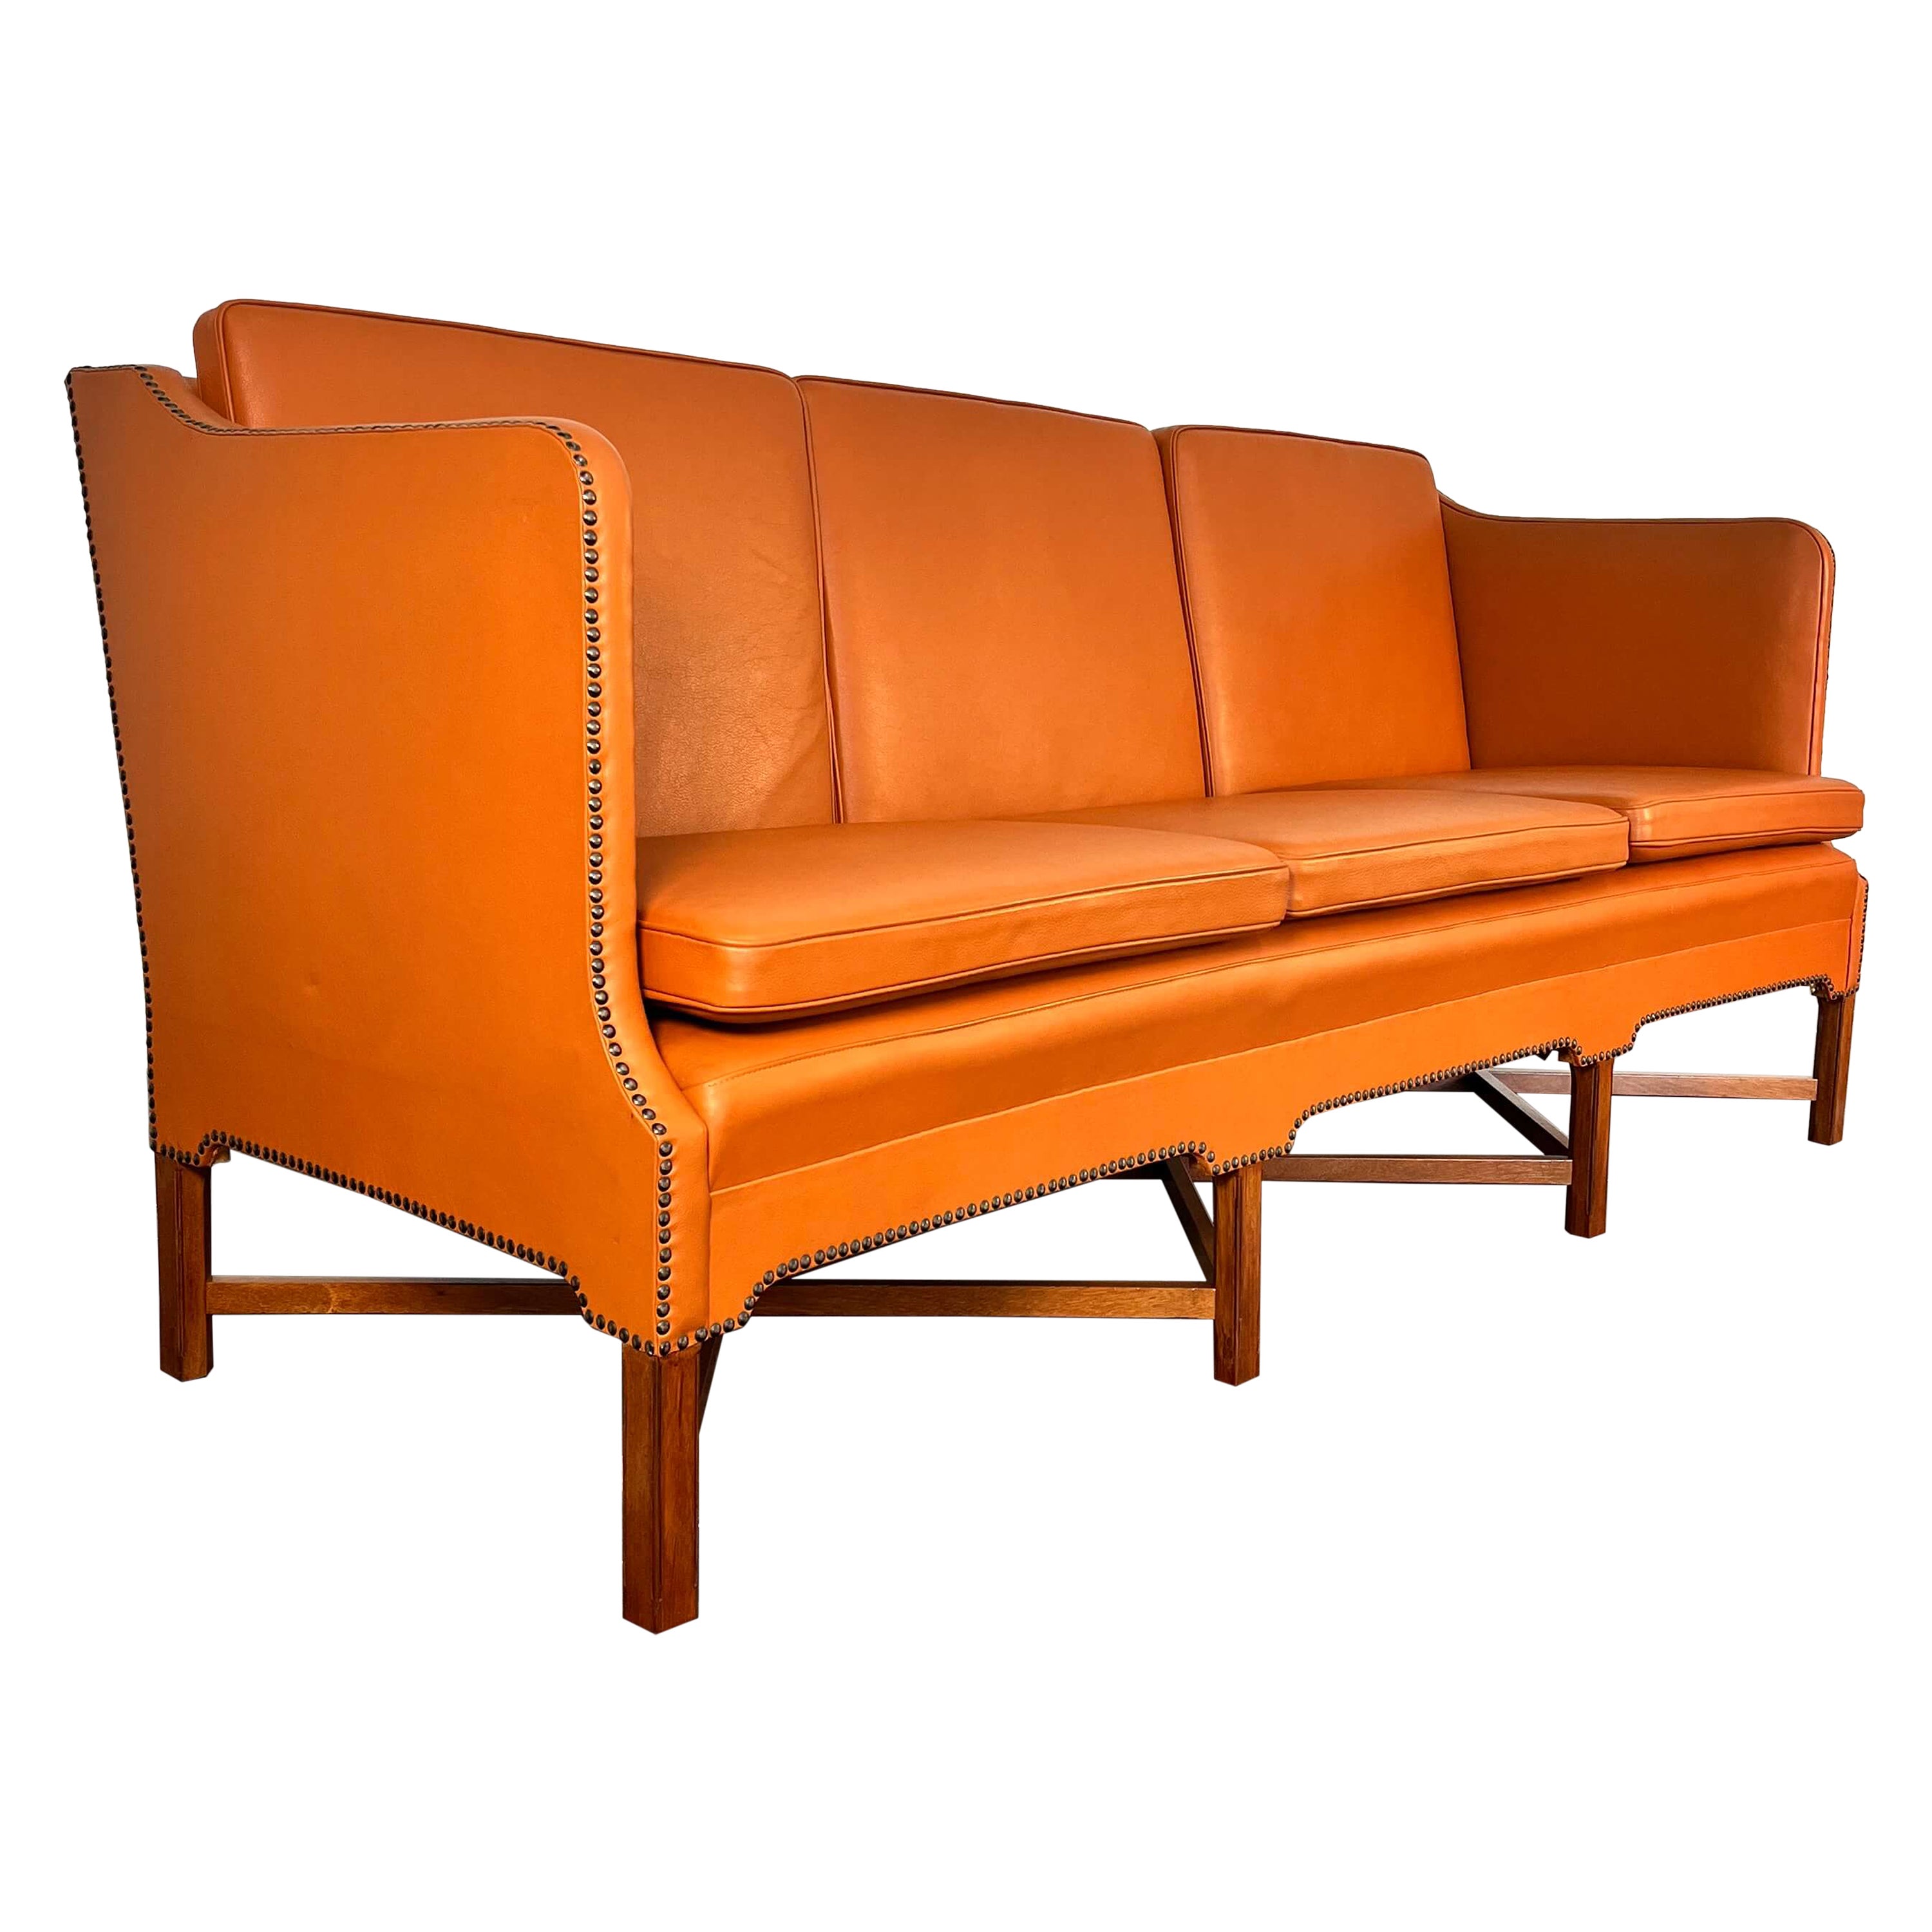 Kaare Klint Sofa Model 4118 in Leather and Mahogany For Sale